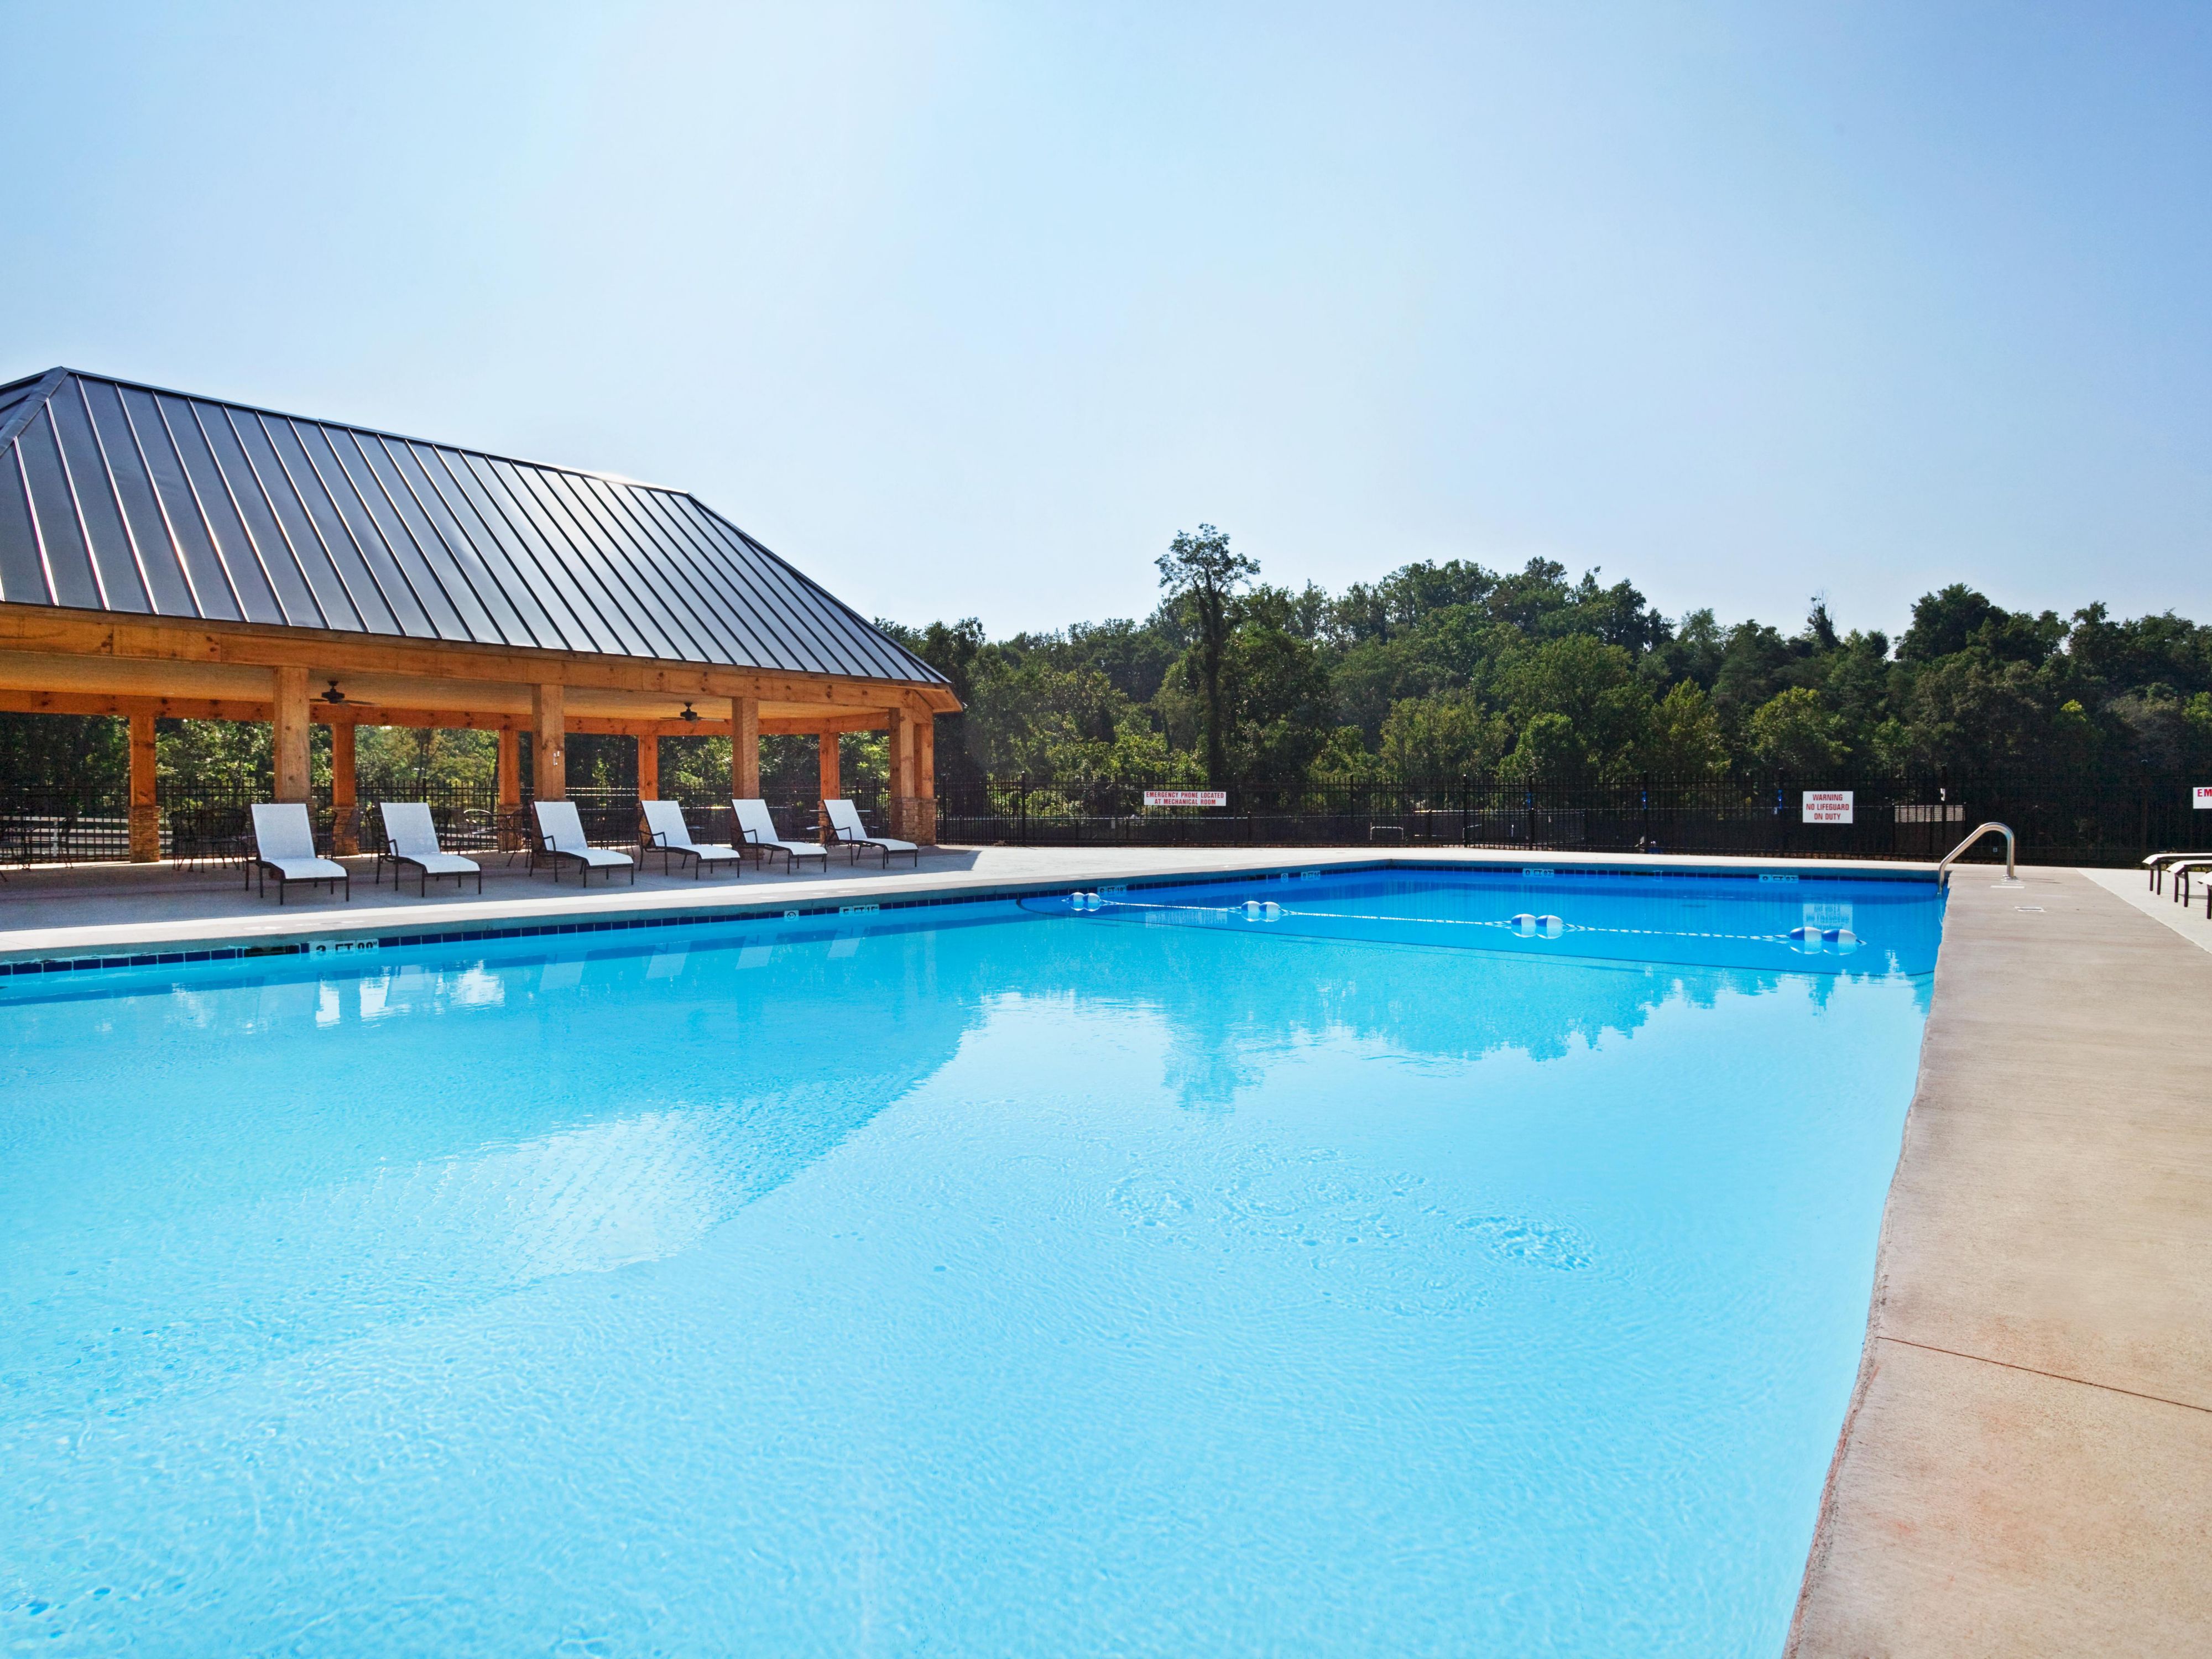 With an outdoor pool, indoor pool, and spa, relaxing is easier than ever when staying at Crowne Plaza® Resort Asheville. Visit our spa where you can completely relax and unwind with a massage, body scrub, body wrap, and more. Make sure to also take a refreshing dip in our indoor pool or bask under the warm sun at our outdoor pool area. 